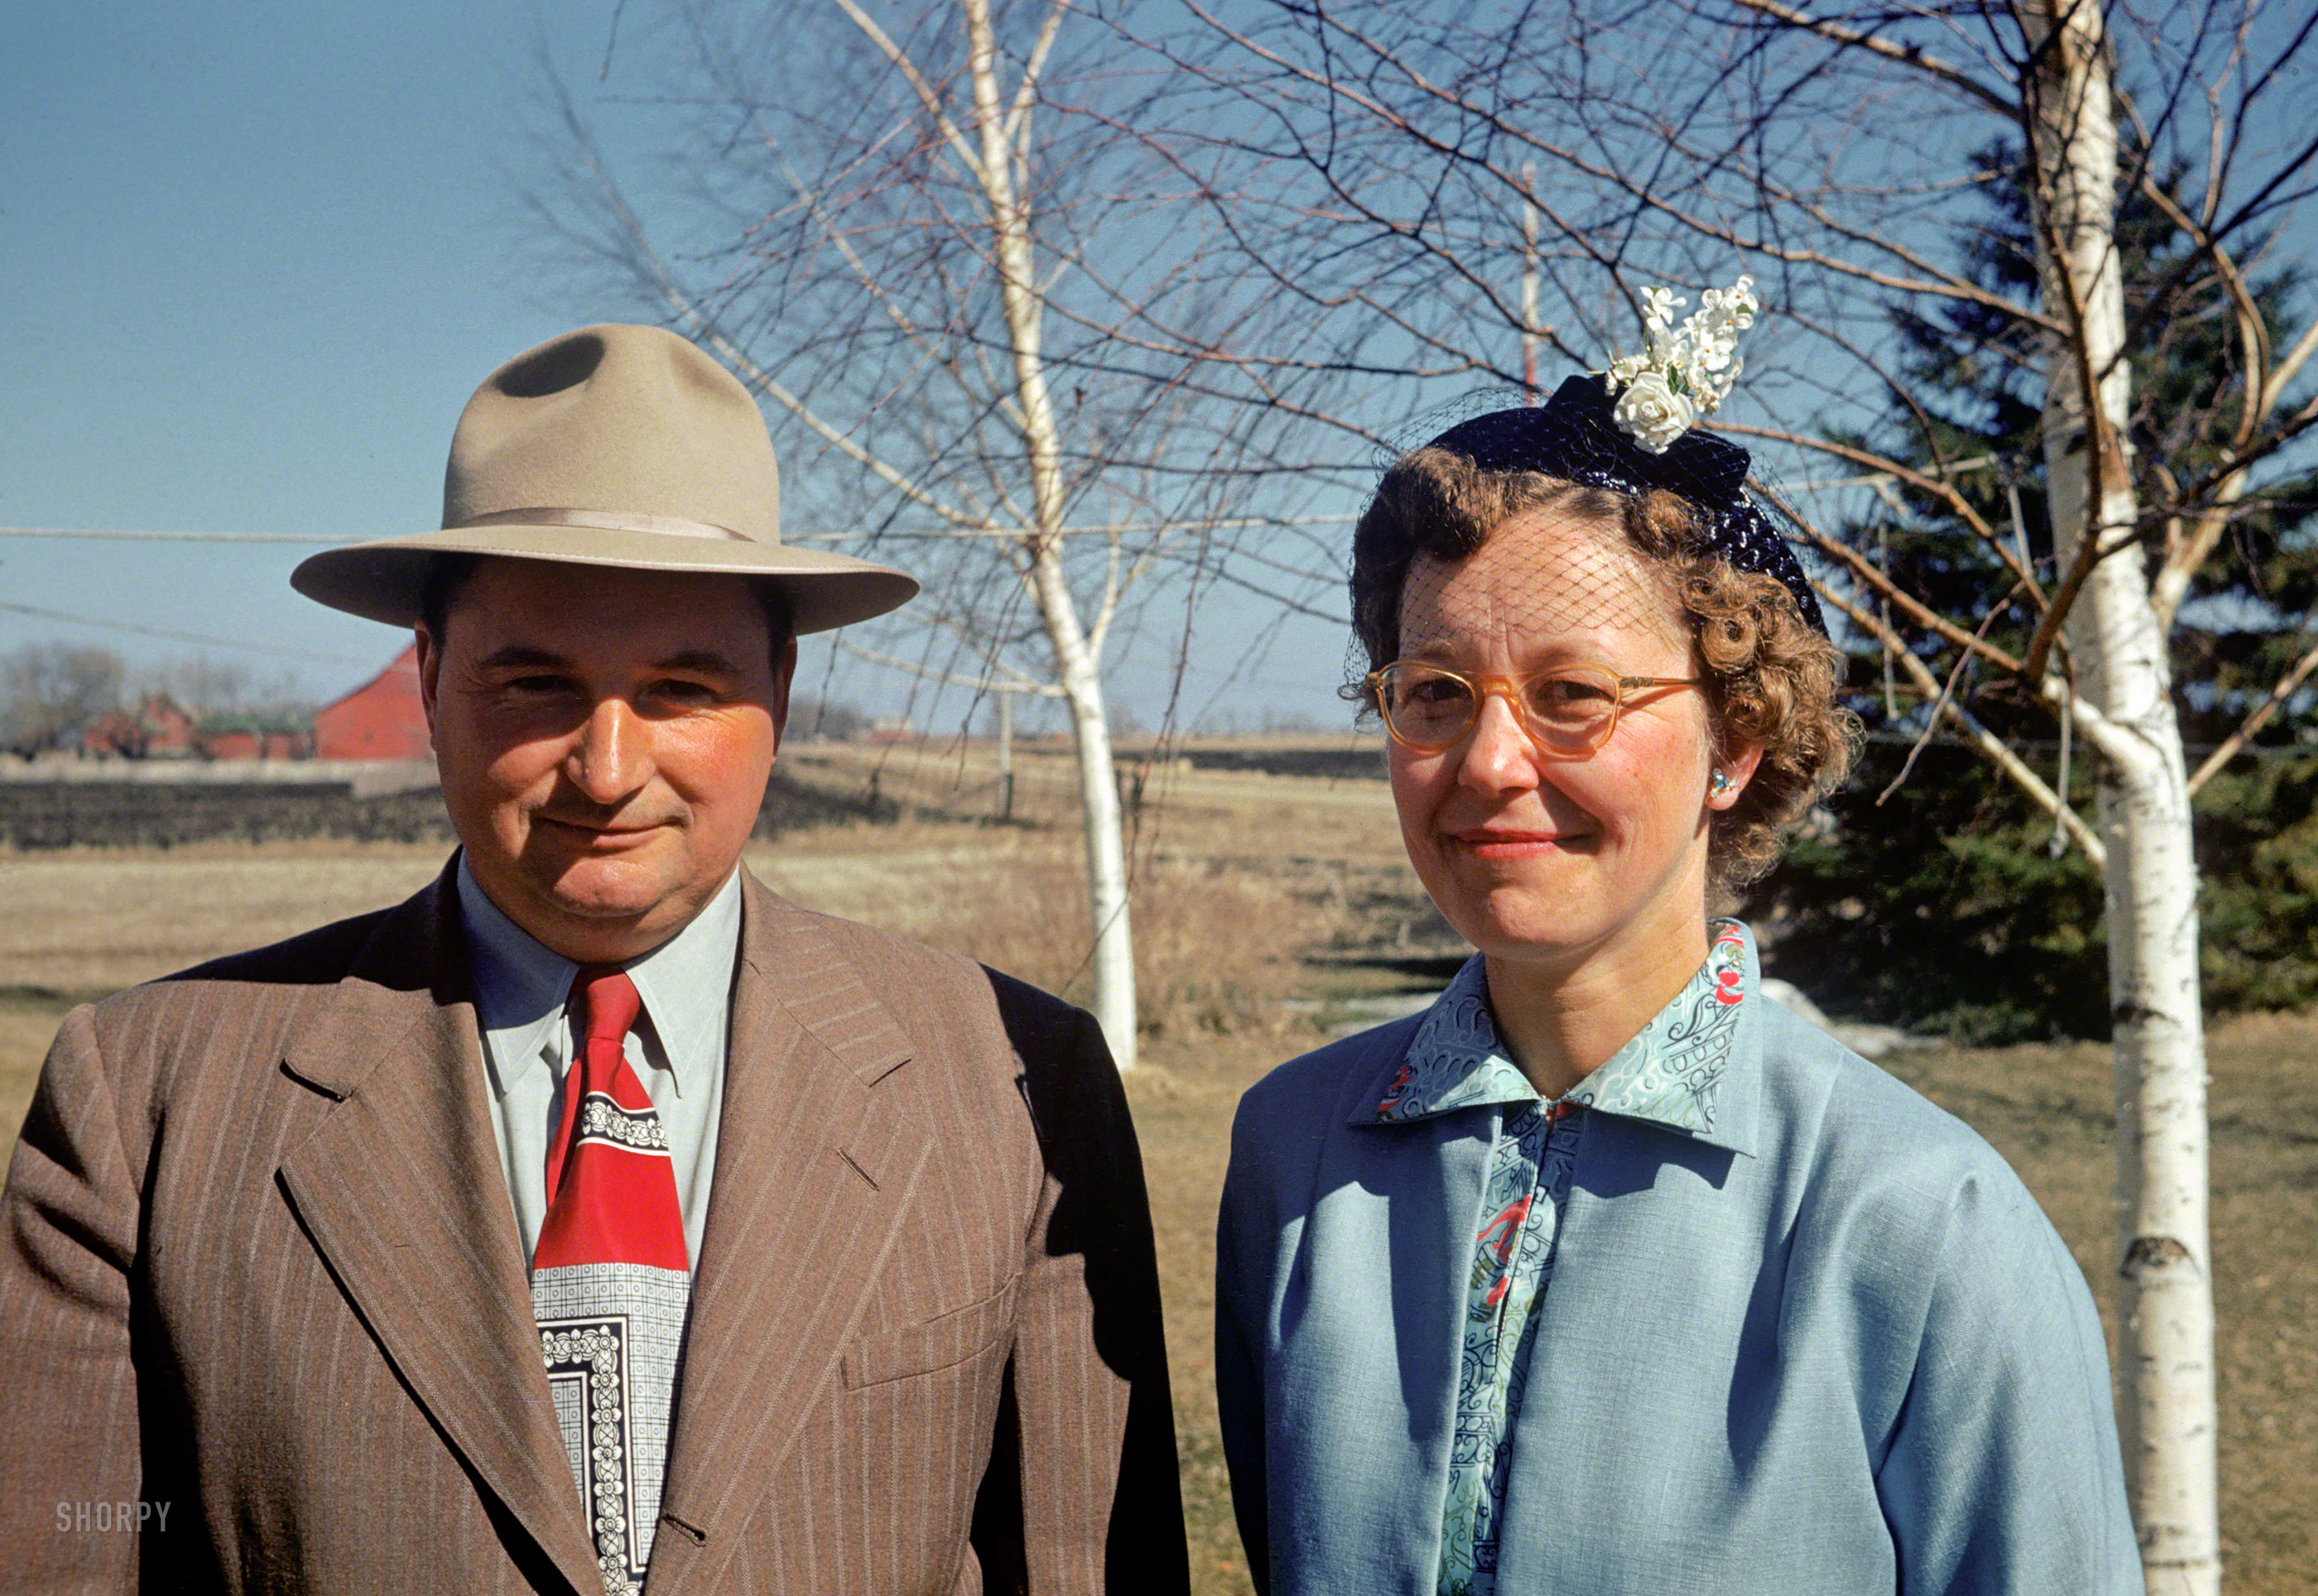 "Howard & Rena, April 1952." Visiting Claude's farm somewhere in Minnesota, affording us our third look at these colorful Kodachromes. View full size.